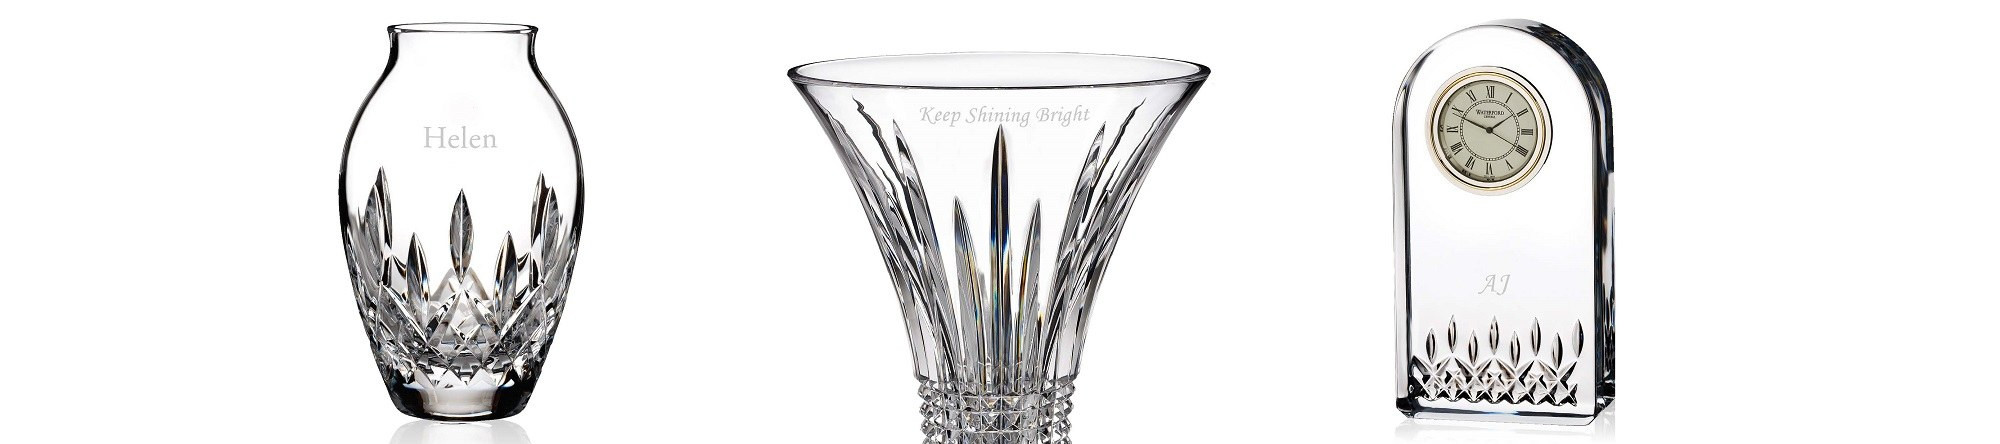 24 Stylish Waterford Giftology Sugar Bud Vase 2024 free download waterford giftology sugar bud vase of personalised clocks vases bowls waterforda crystal pertaining to home gifts